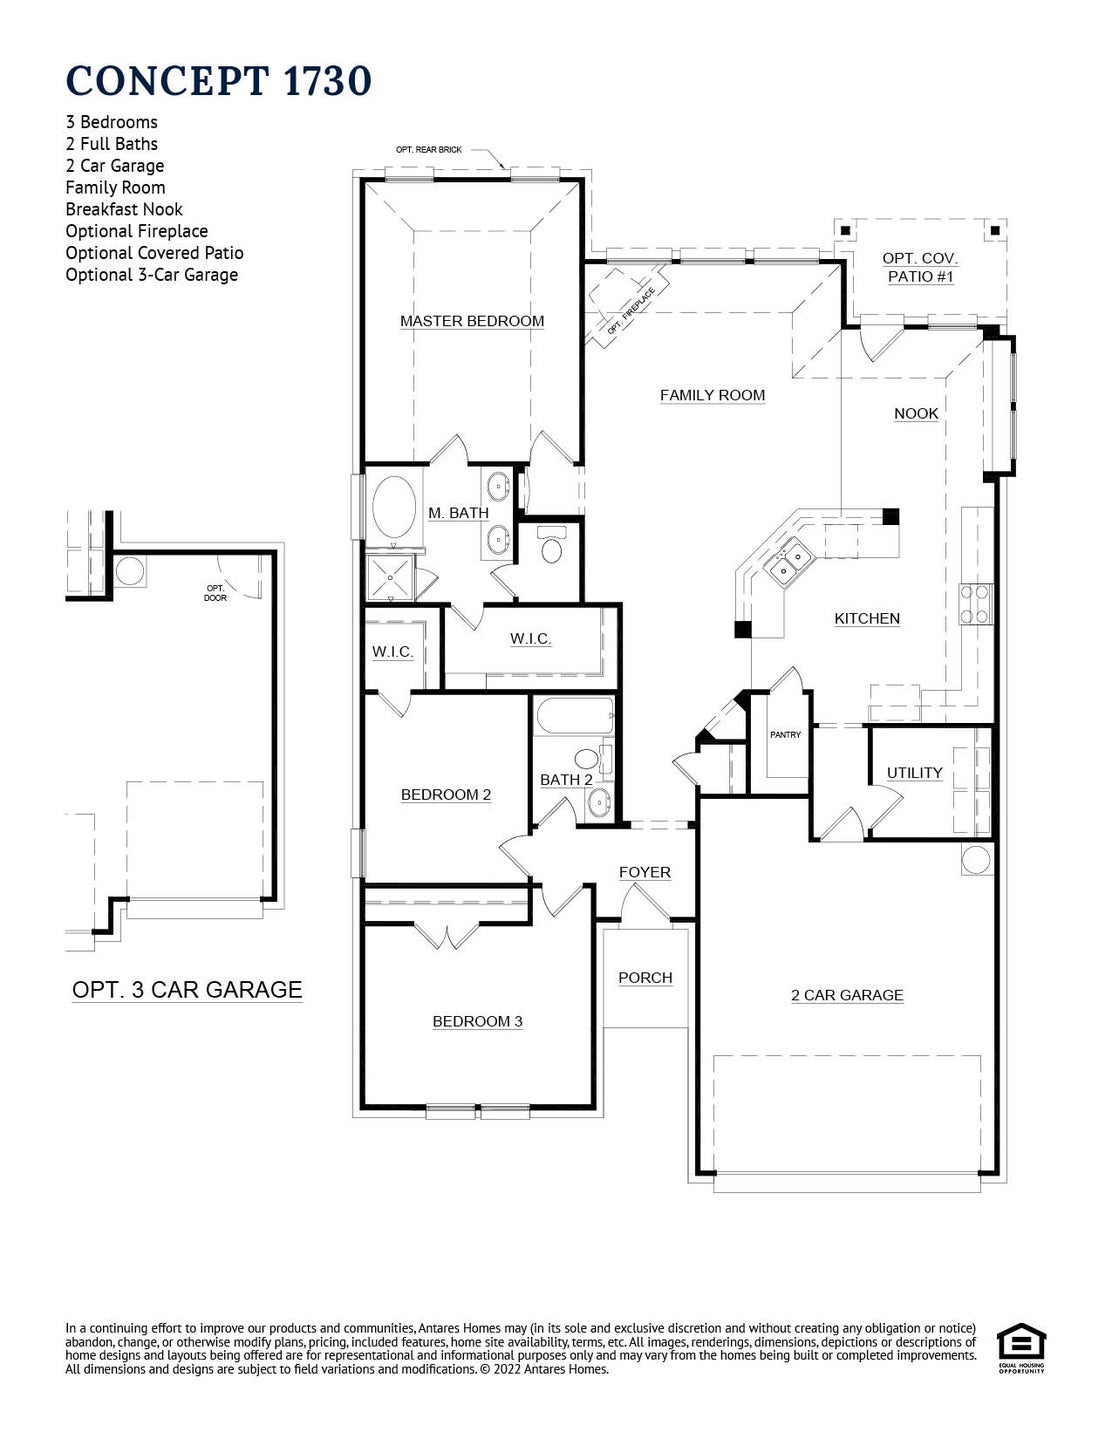 1,753sf New Home in Crowley, TX